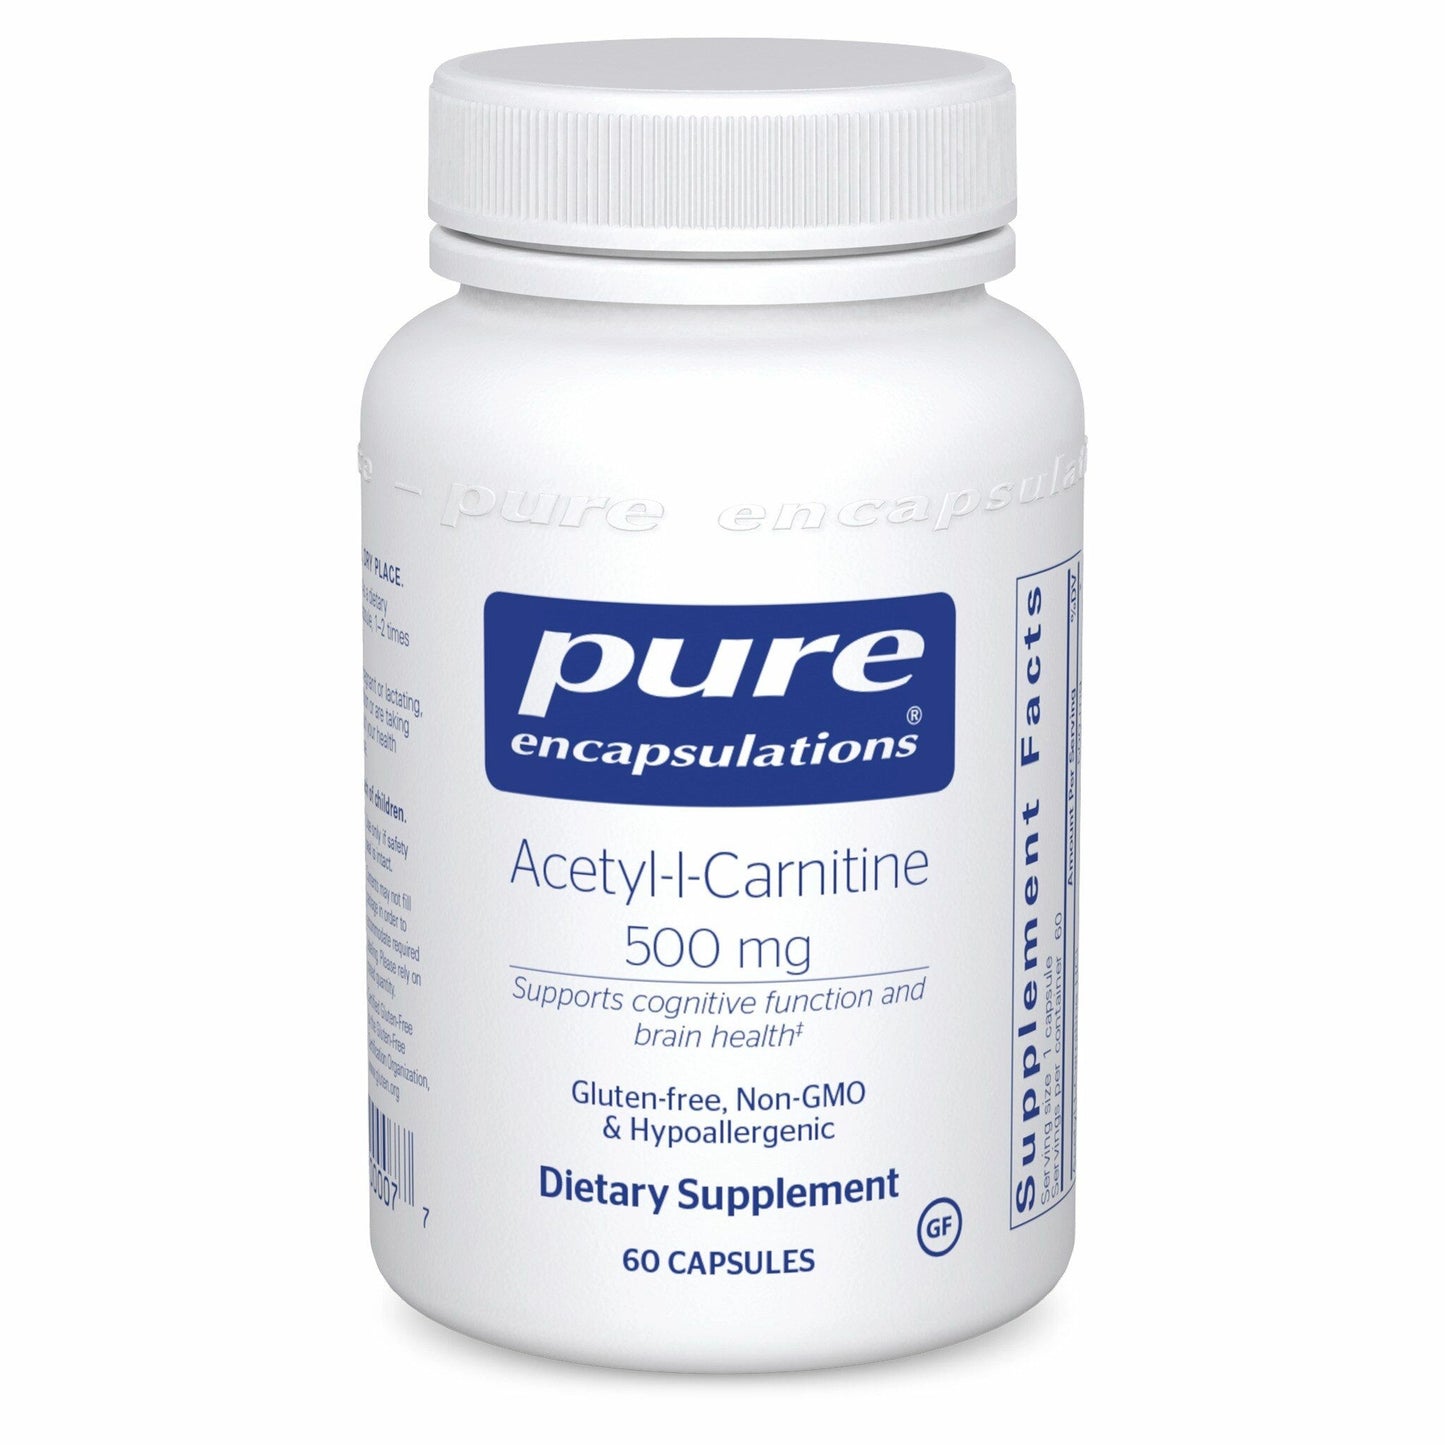 Acetyl-l-Carnitine 500 mg 60's